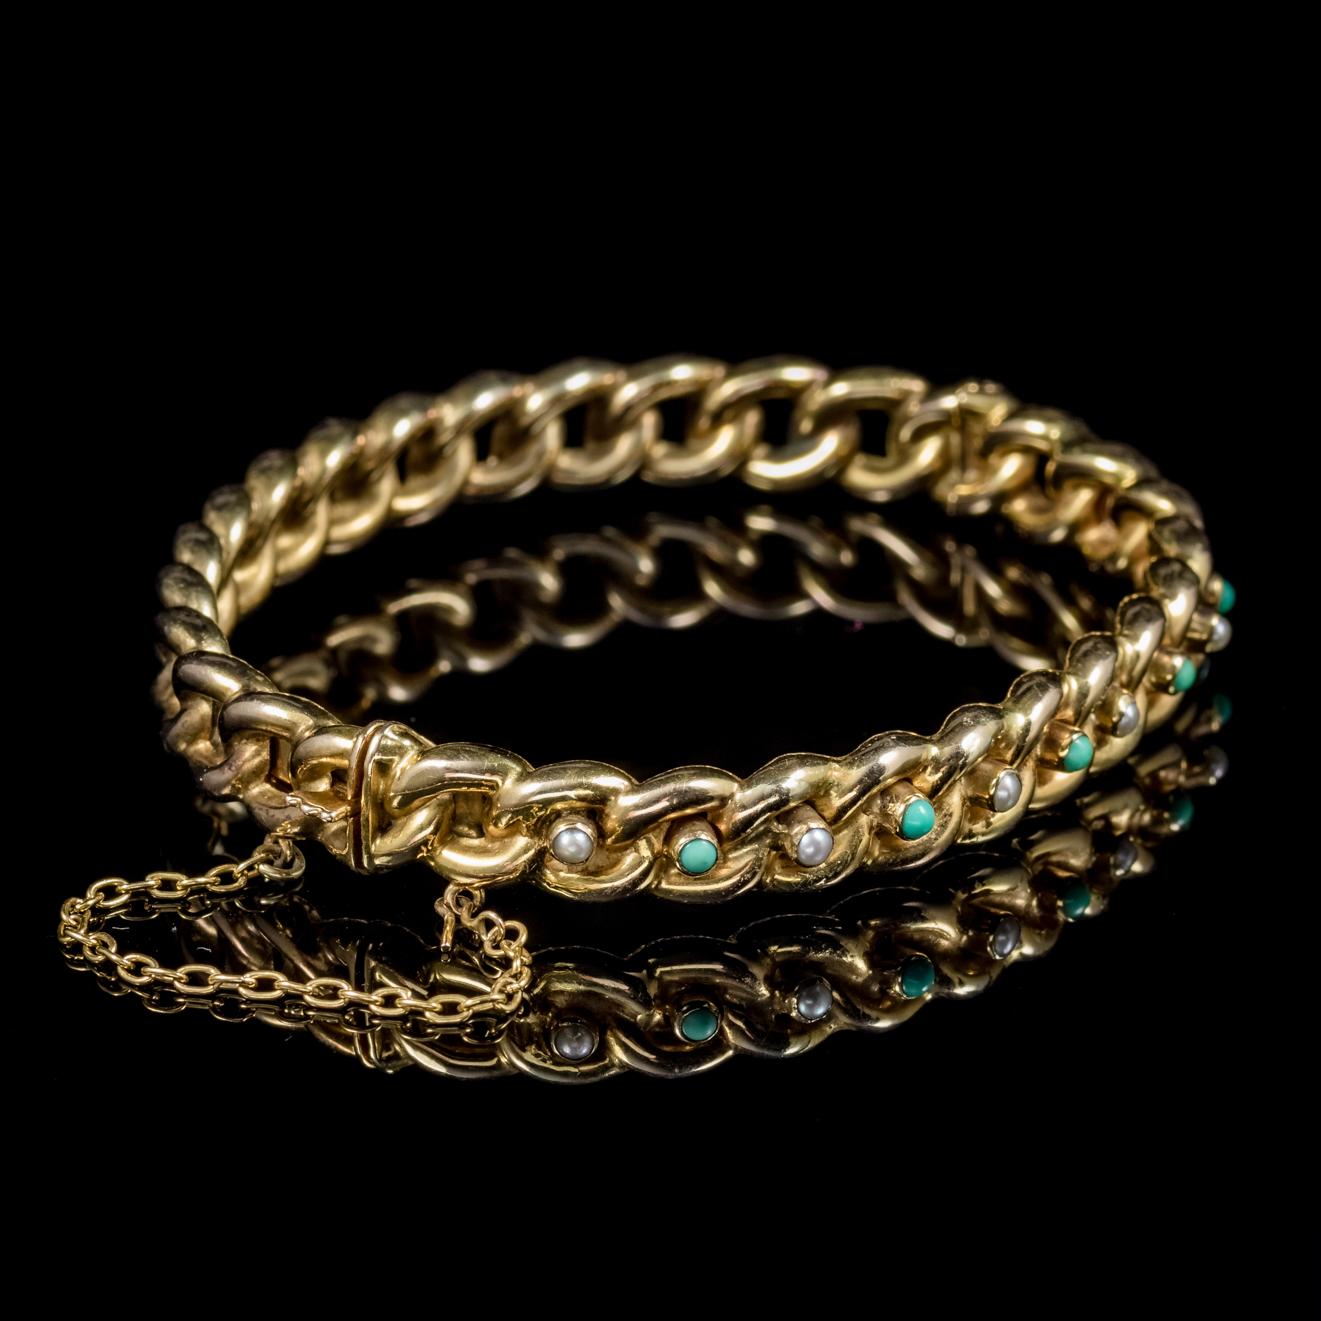 A fabulous antique Victorian Turquoise and Pearl bangle dated 1889.

Set with interchanging Turquoise and Pearls across the front in a lovely 15ct Yellow Gold chain link setting. 

Turquoise stones are considered a symbol of friendship and were once